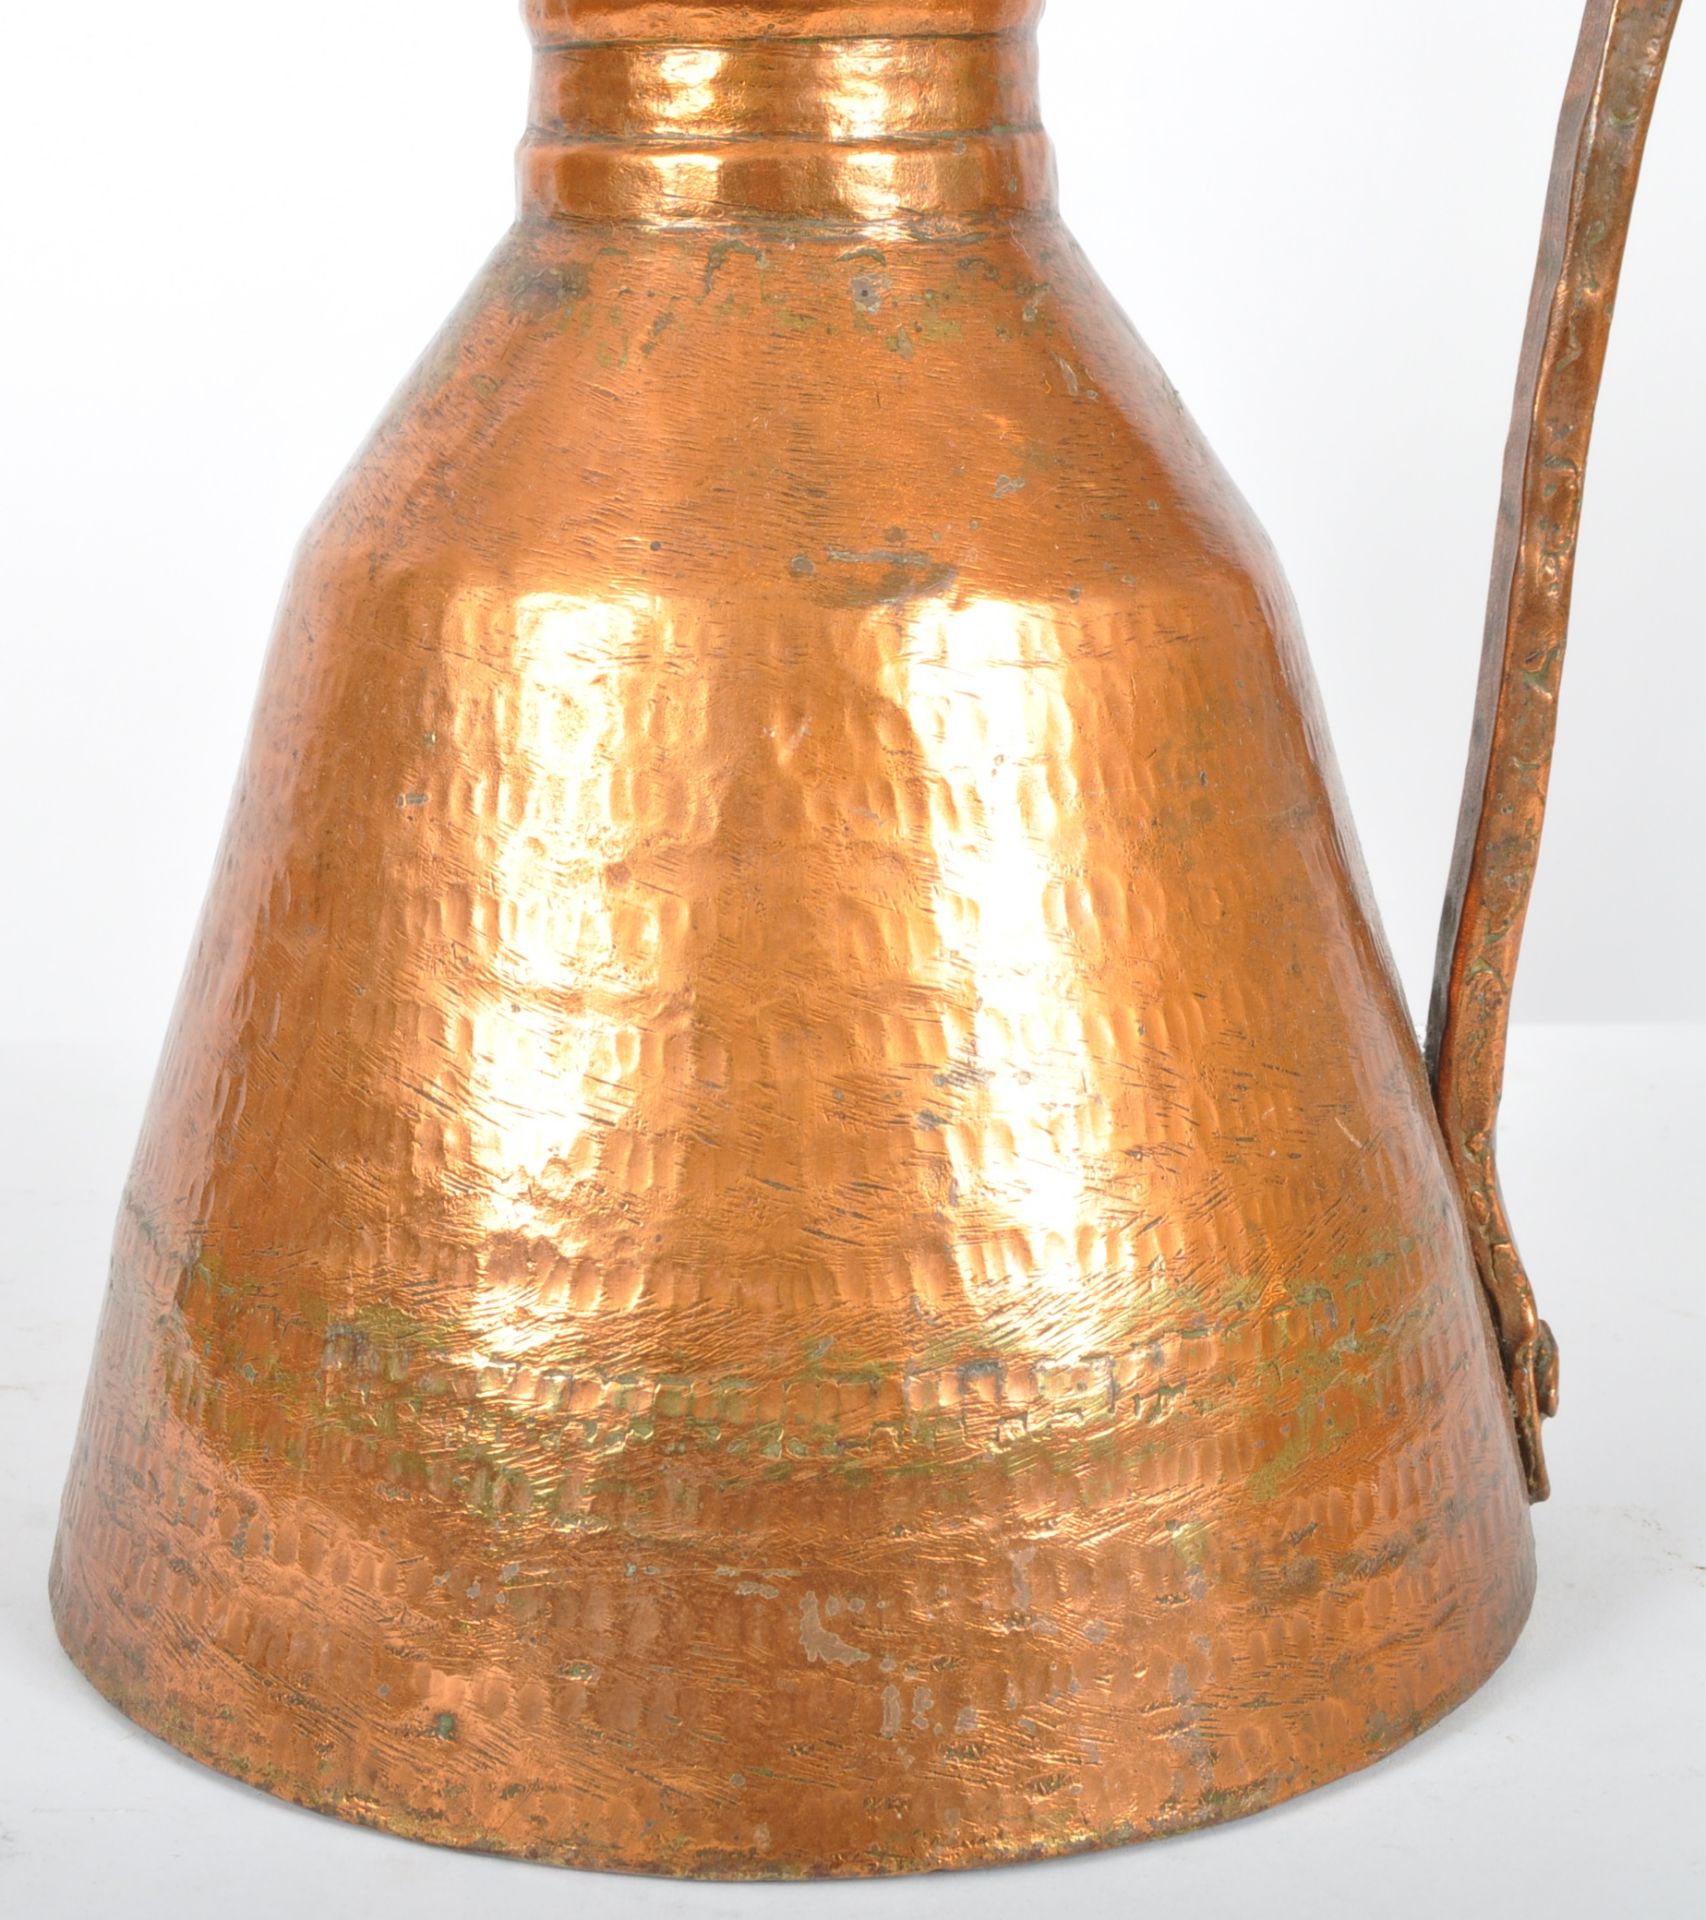 LATE 18TH CENTURY UPCYCLED COPPER EWER JUG LAMP - Image 4 of 8